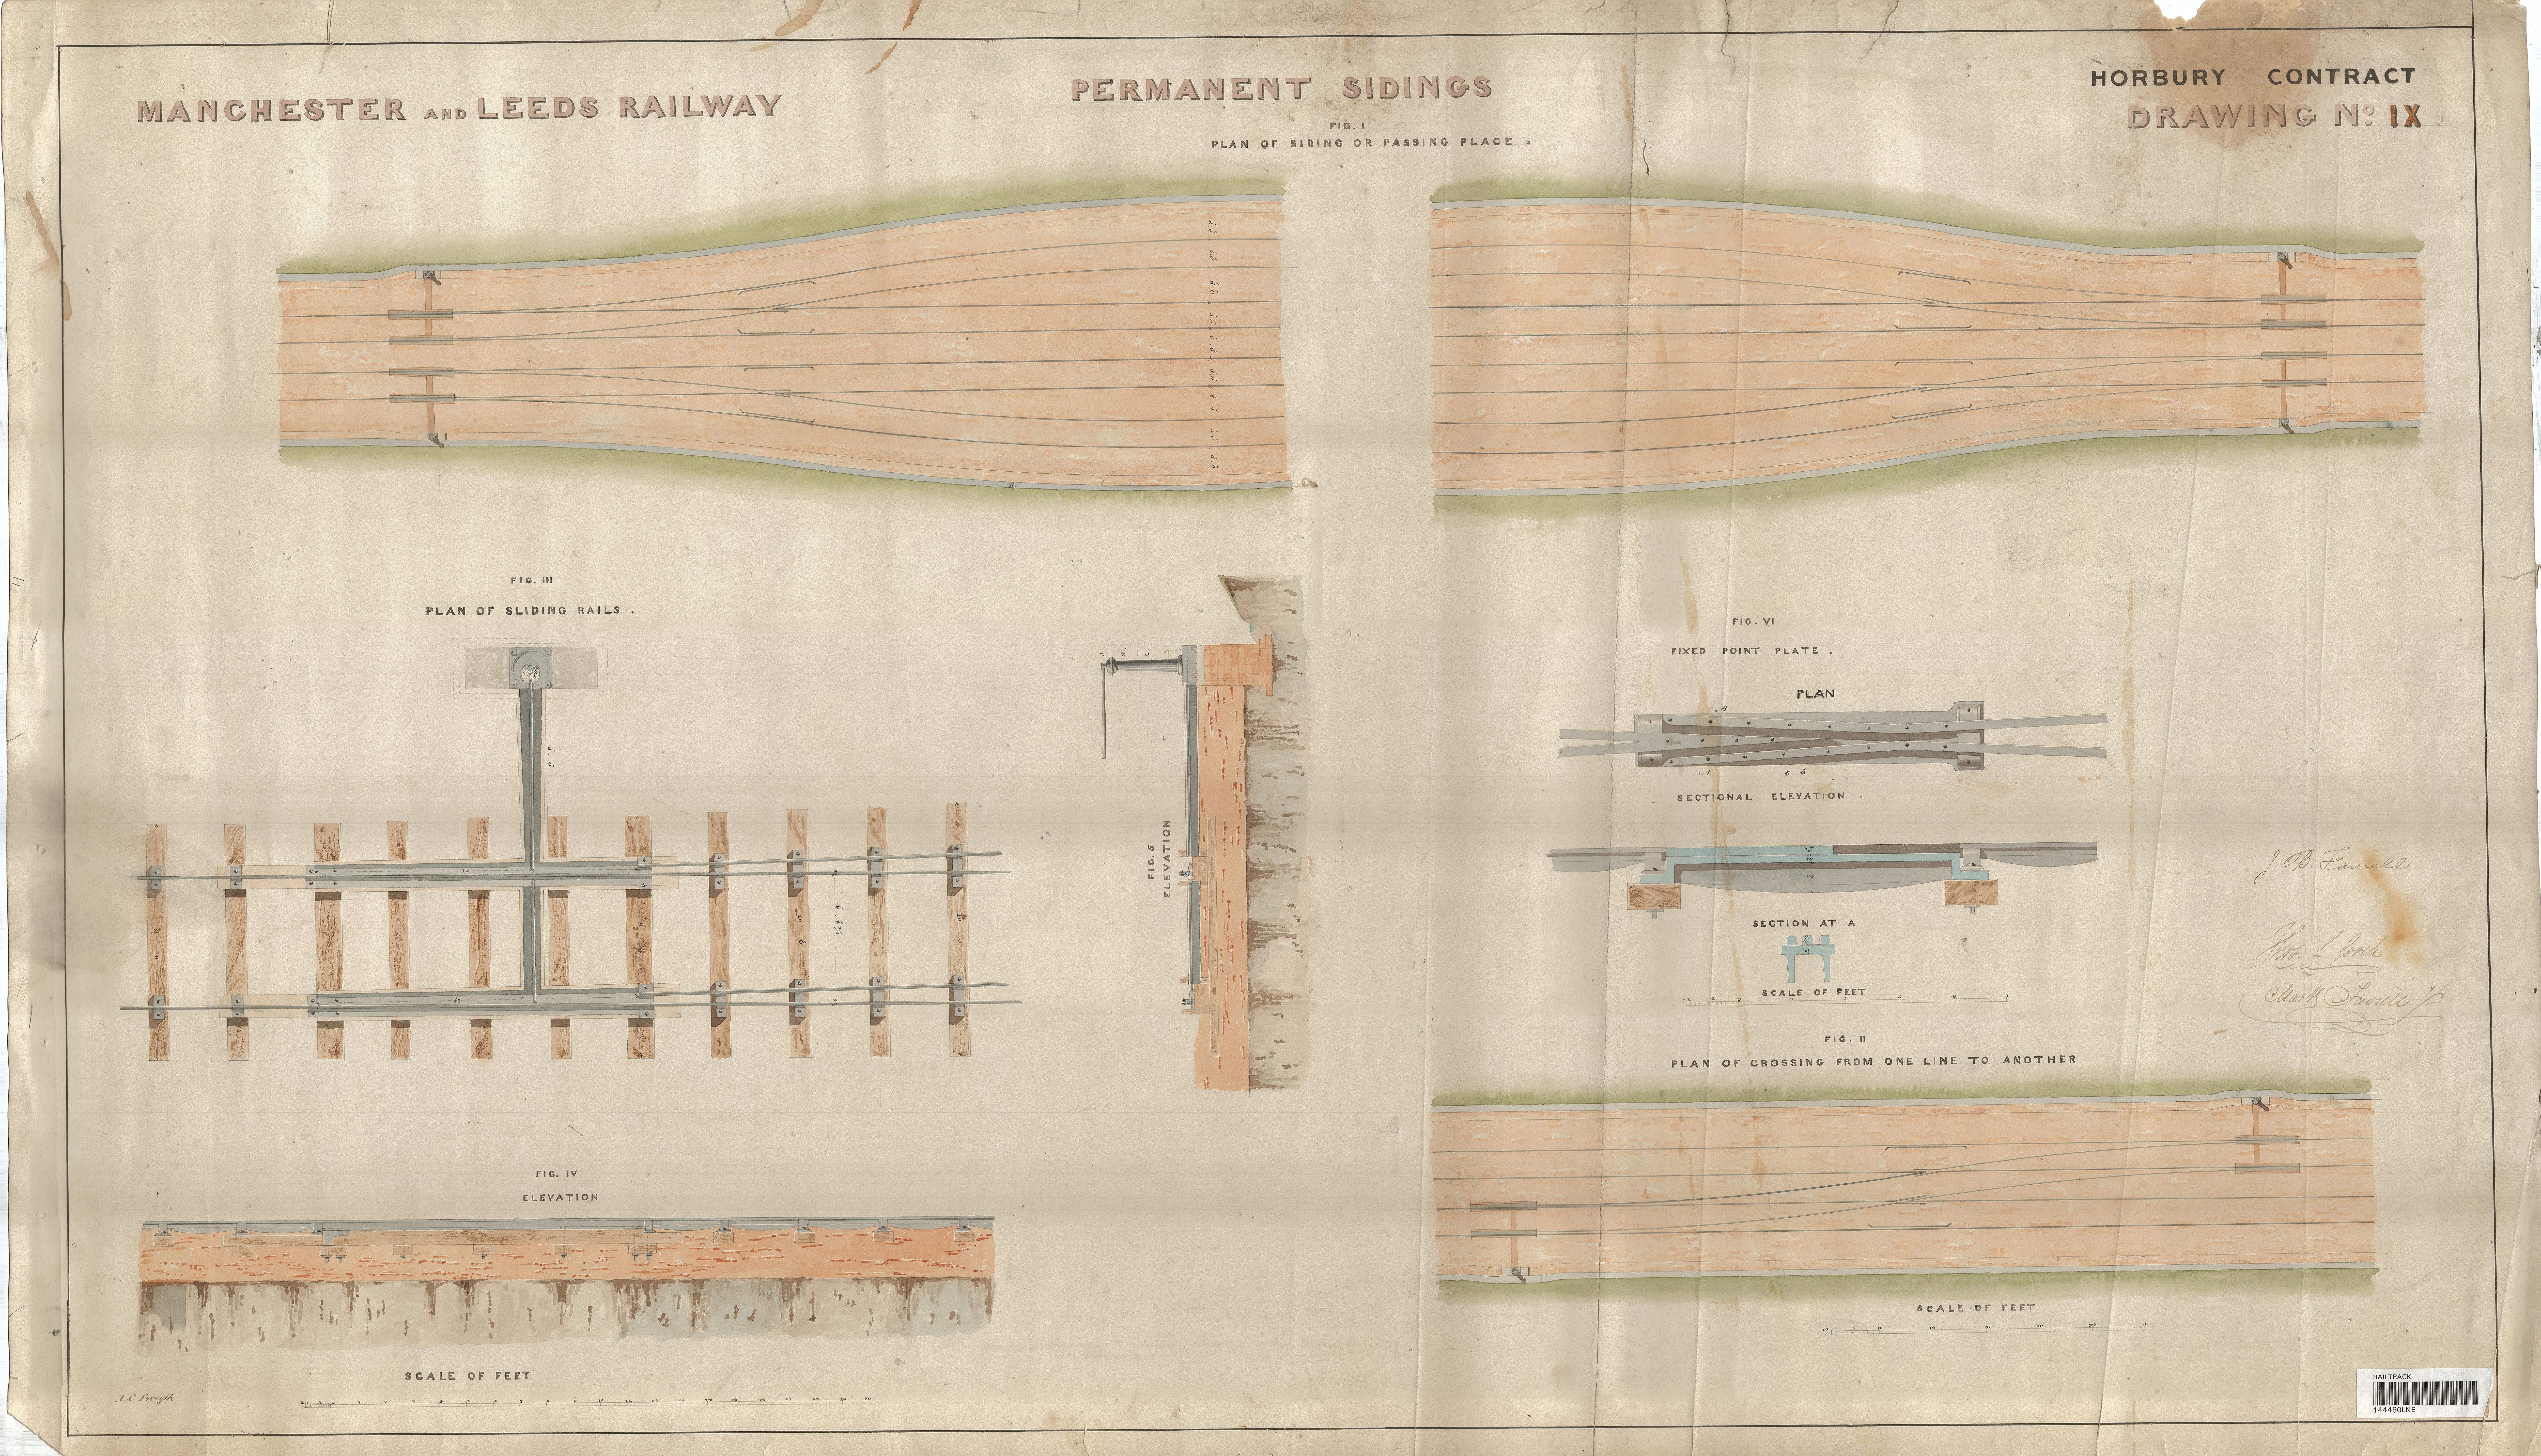 Original archive drawings of permanent sidings for the Manchester and Leeds railway